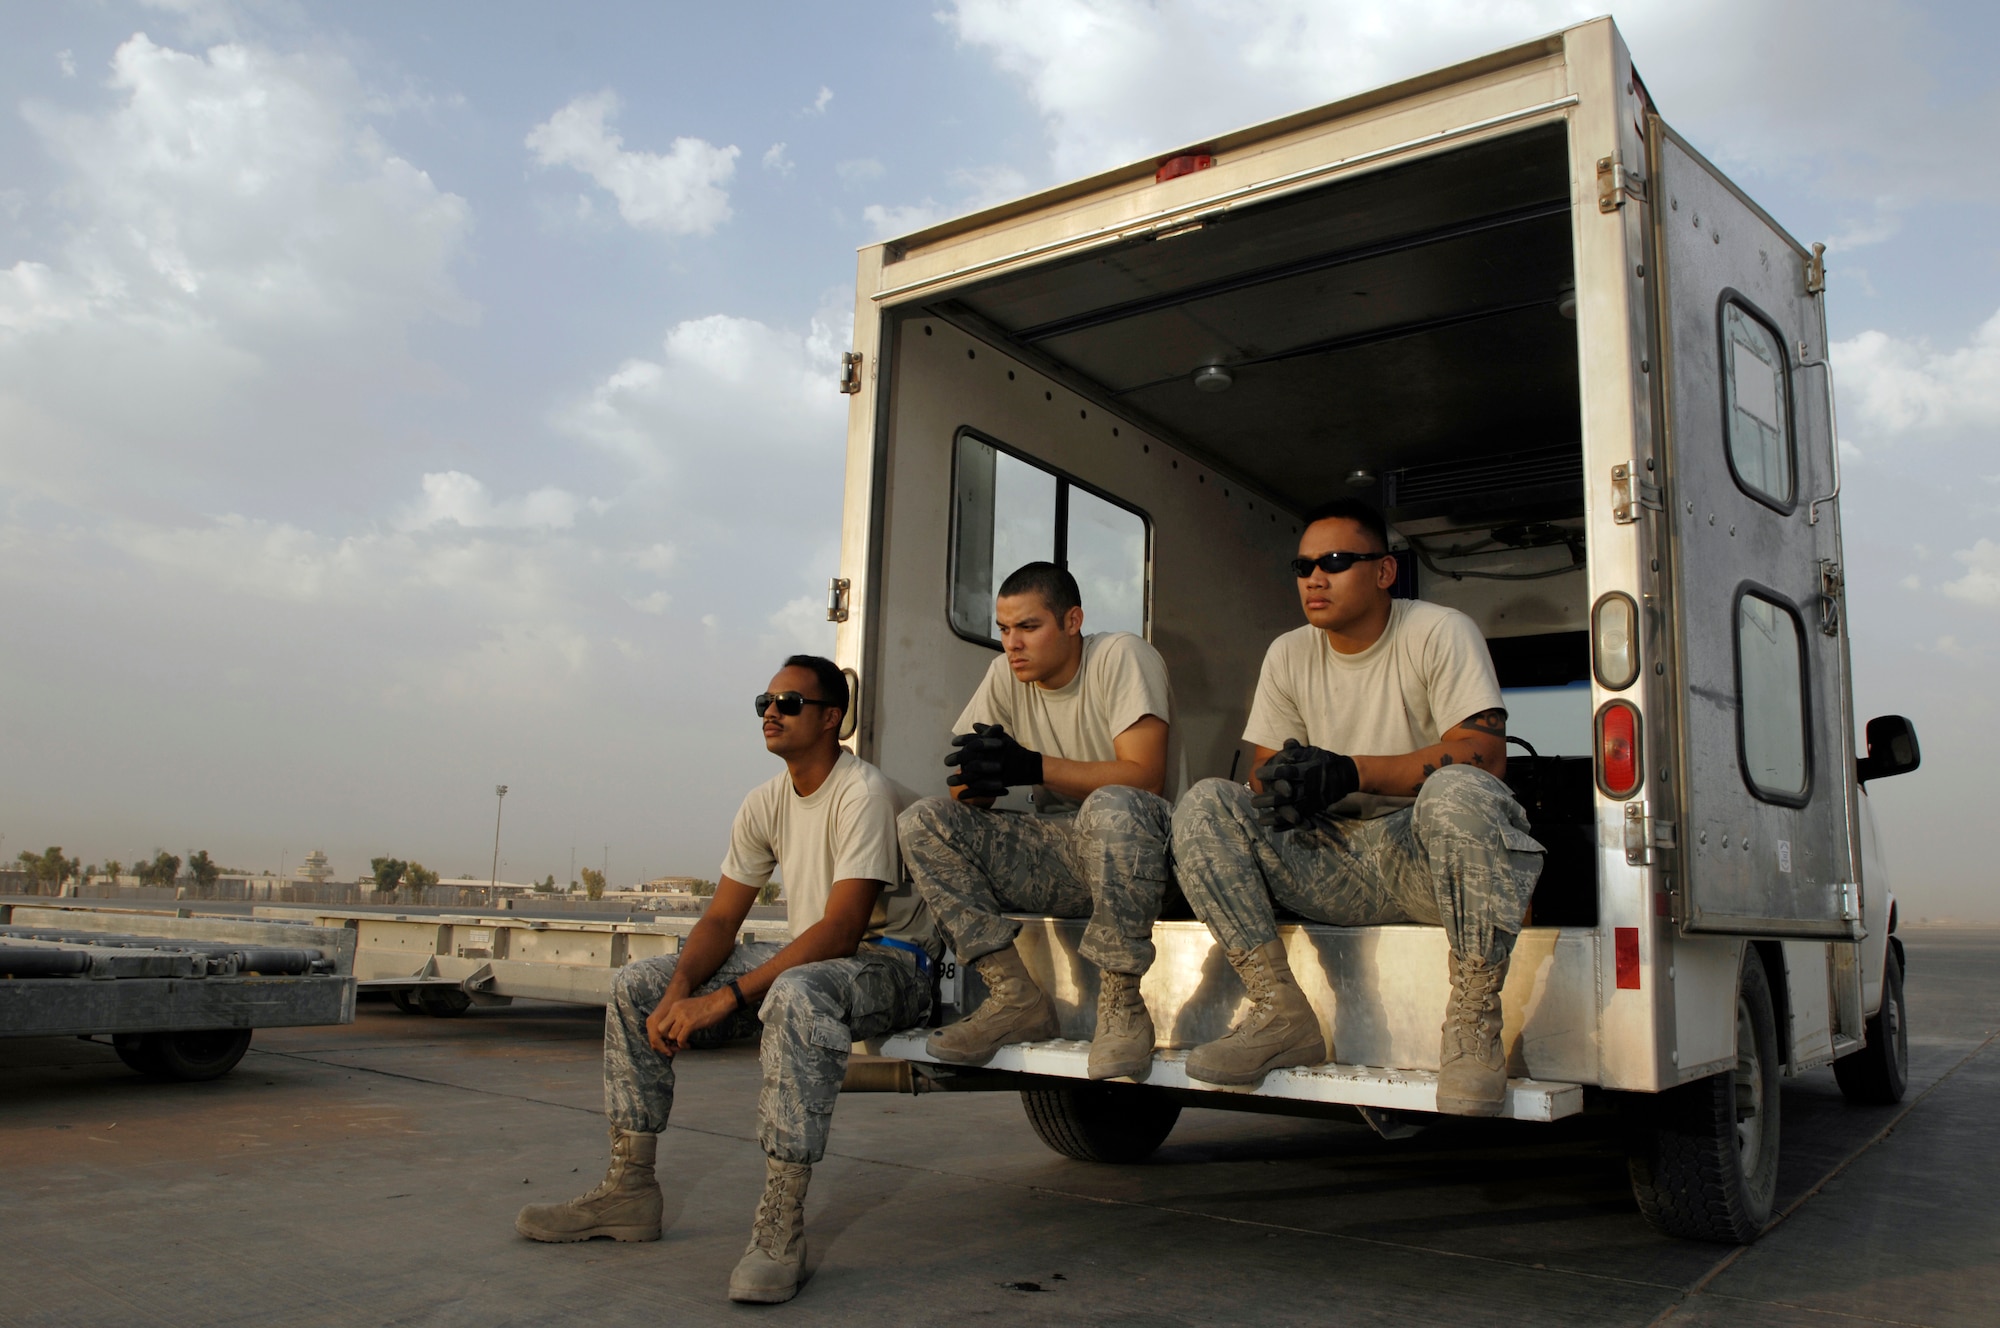 JOINT BASE BALAD, Iraq -- Airmen 1st Class Shane Costa and Dennis Gaxiola and Senior Airman Derek Dumlao wait for an aircraft to arrive here shortly after dawn Aug. 24. All three Airmen completed a new Air Force Reserve seasoning training program prior to deploying here. The program allows Airmen to voluntarily remain on active duty for upgrade training, finishing it in three months instead of 14 to 16 months. Dumlao, Gaxiola and Costa, aerial porters with the 332nd Expeditionary Logistics Readiness Squadron here, are deployed from the 624th Regional Support Group at Hickam Air Force Base, Hawaii. All three Airmen graduated from Leilehua High School in Wahiawa, Hawaii, in 2004. (U.S. Air Force photo/Airman 1st Class Jason Epley)